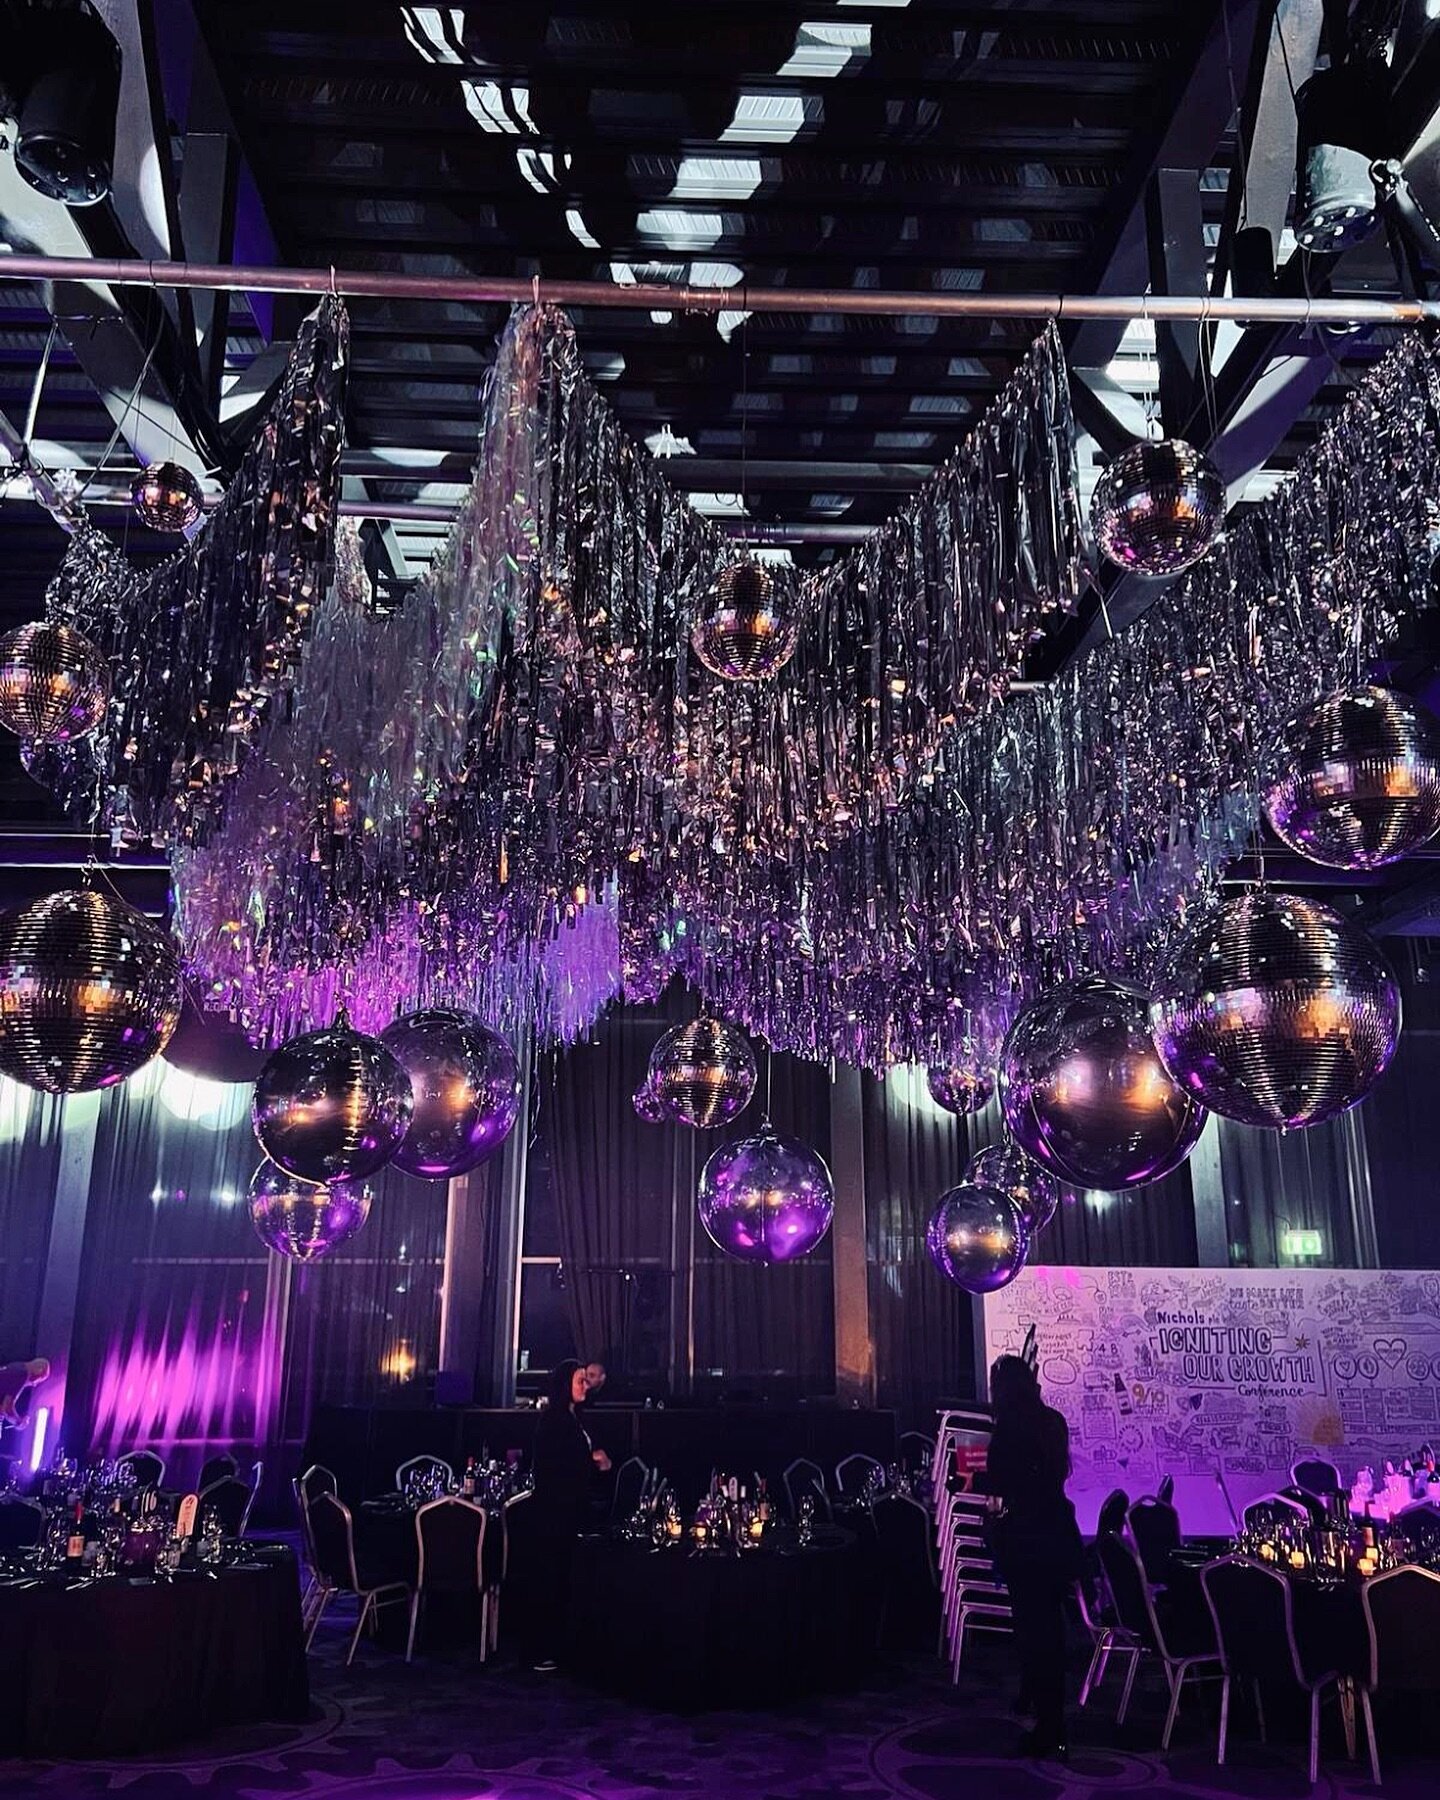 Oh my 🤤🪩 

Our tassel bangs and disco balls in all their silver metallic shimmery glory 😍😍😍

.
.
#eventsdecormanchester #fairylightcanopymanchester #eventsmanchester #fairylightcanopywithgreenery #eventsdecorationmanchester #happytimes #weddings